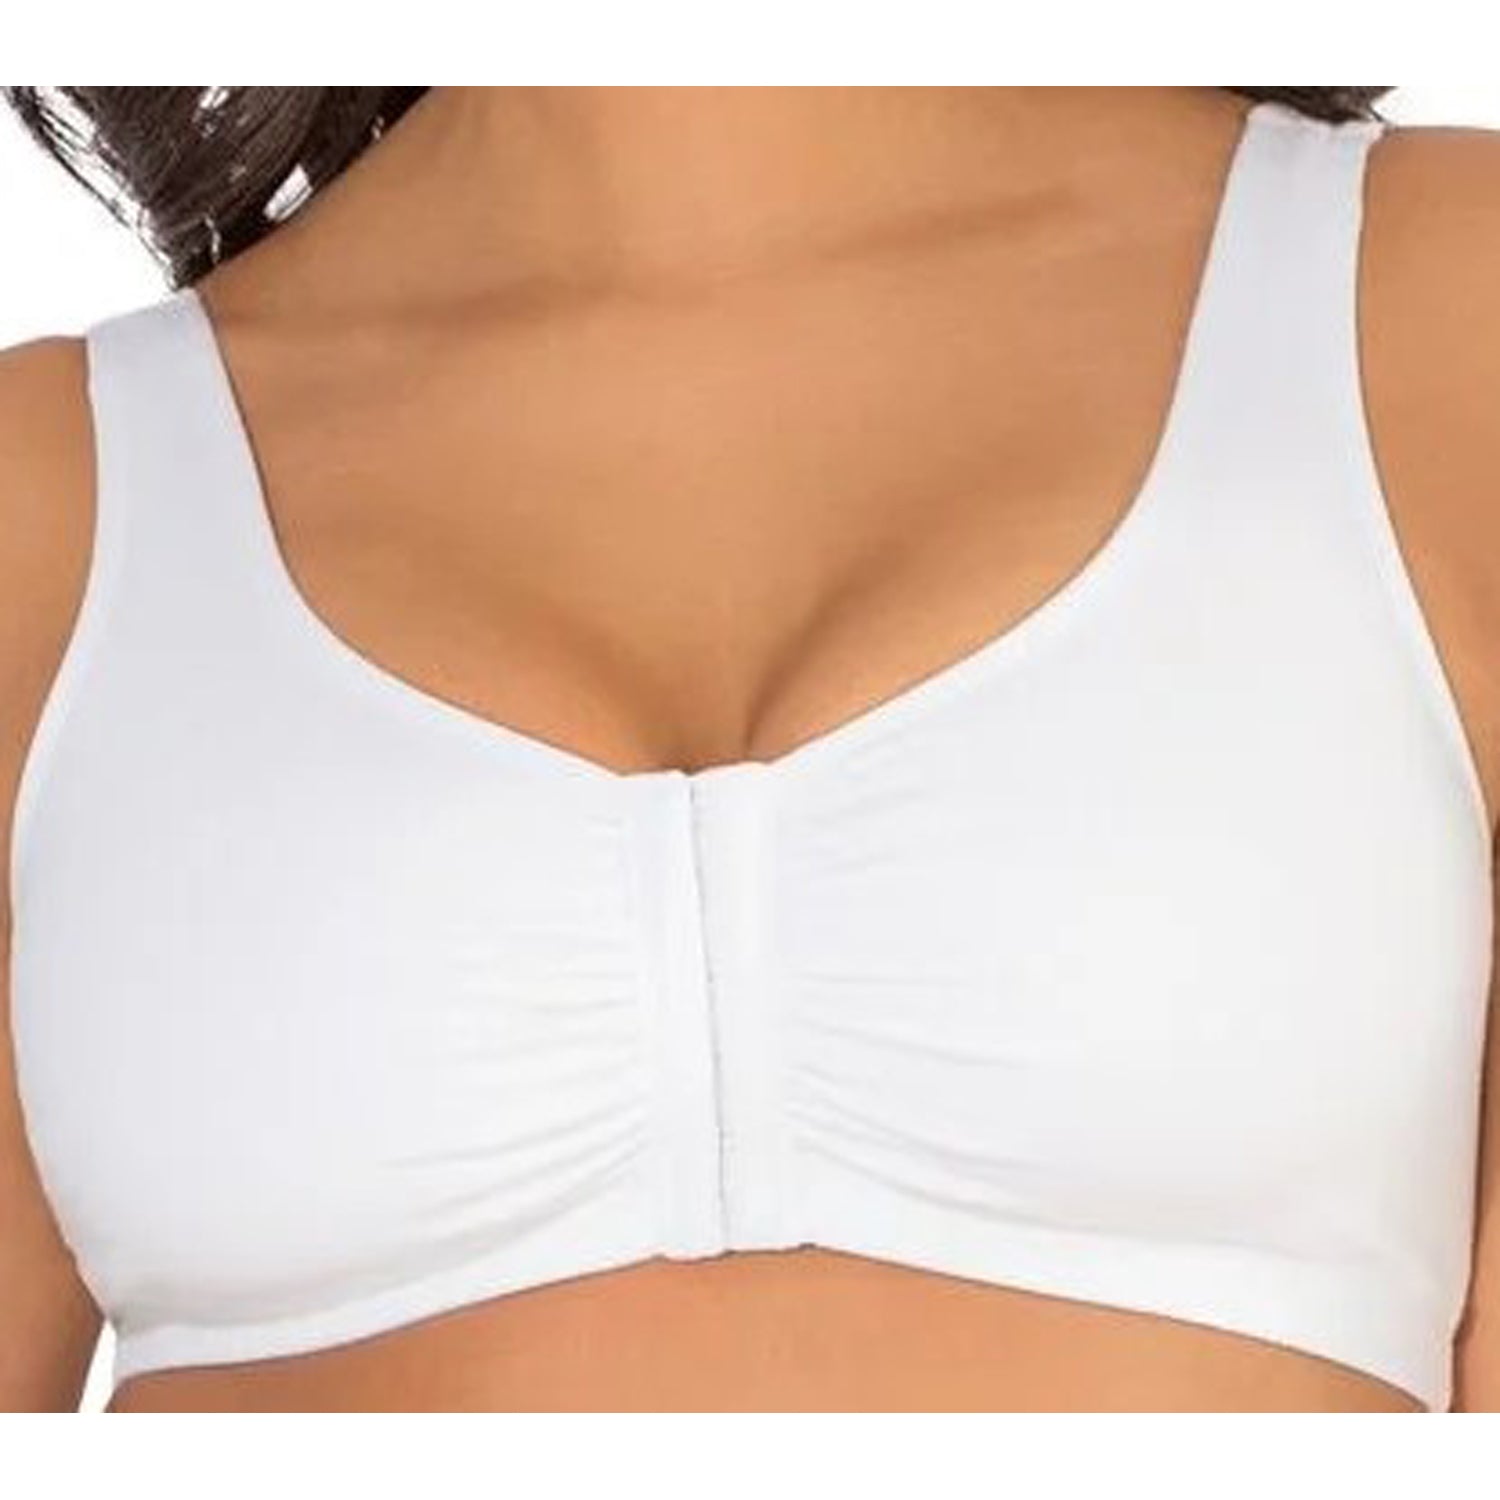 Fruit Of The Loom Women's Beyond Soft Front Closure White Cotton Bra 96014  – Good's Store Online